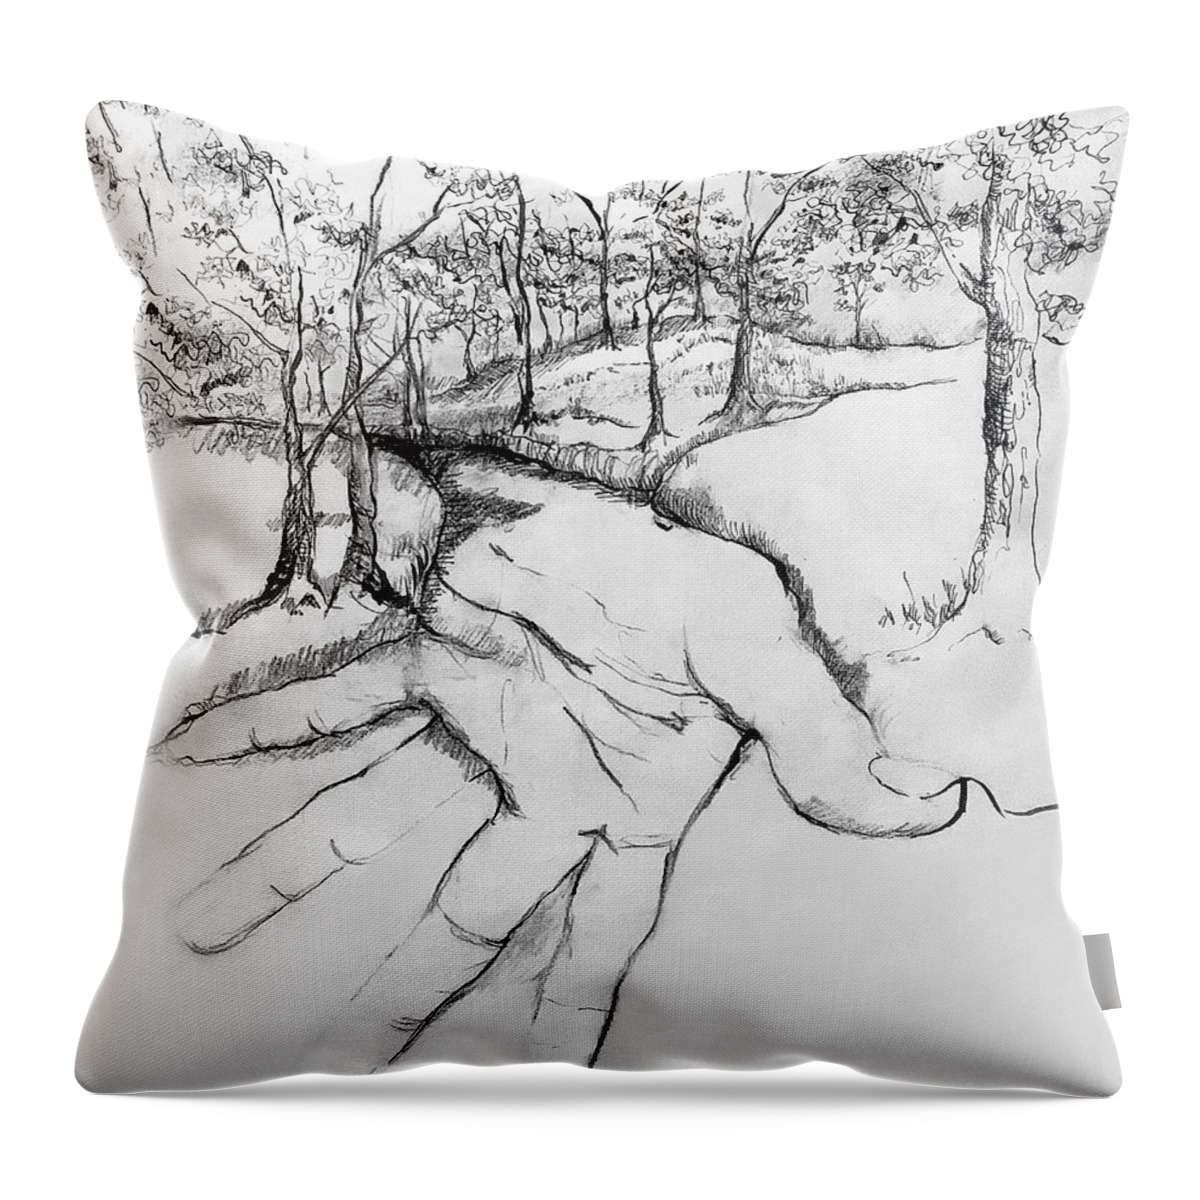 Conte Crayon Throw Pillow featuring the photograph Natures Touch by Art Cole